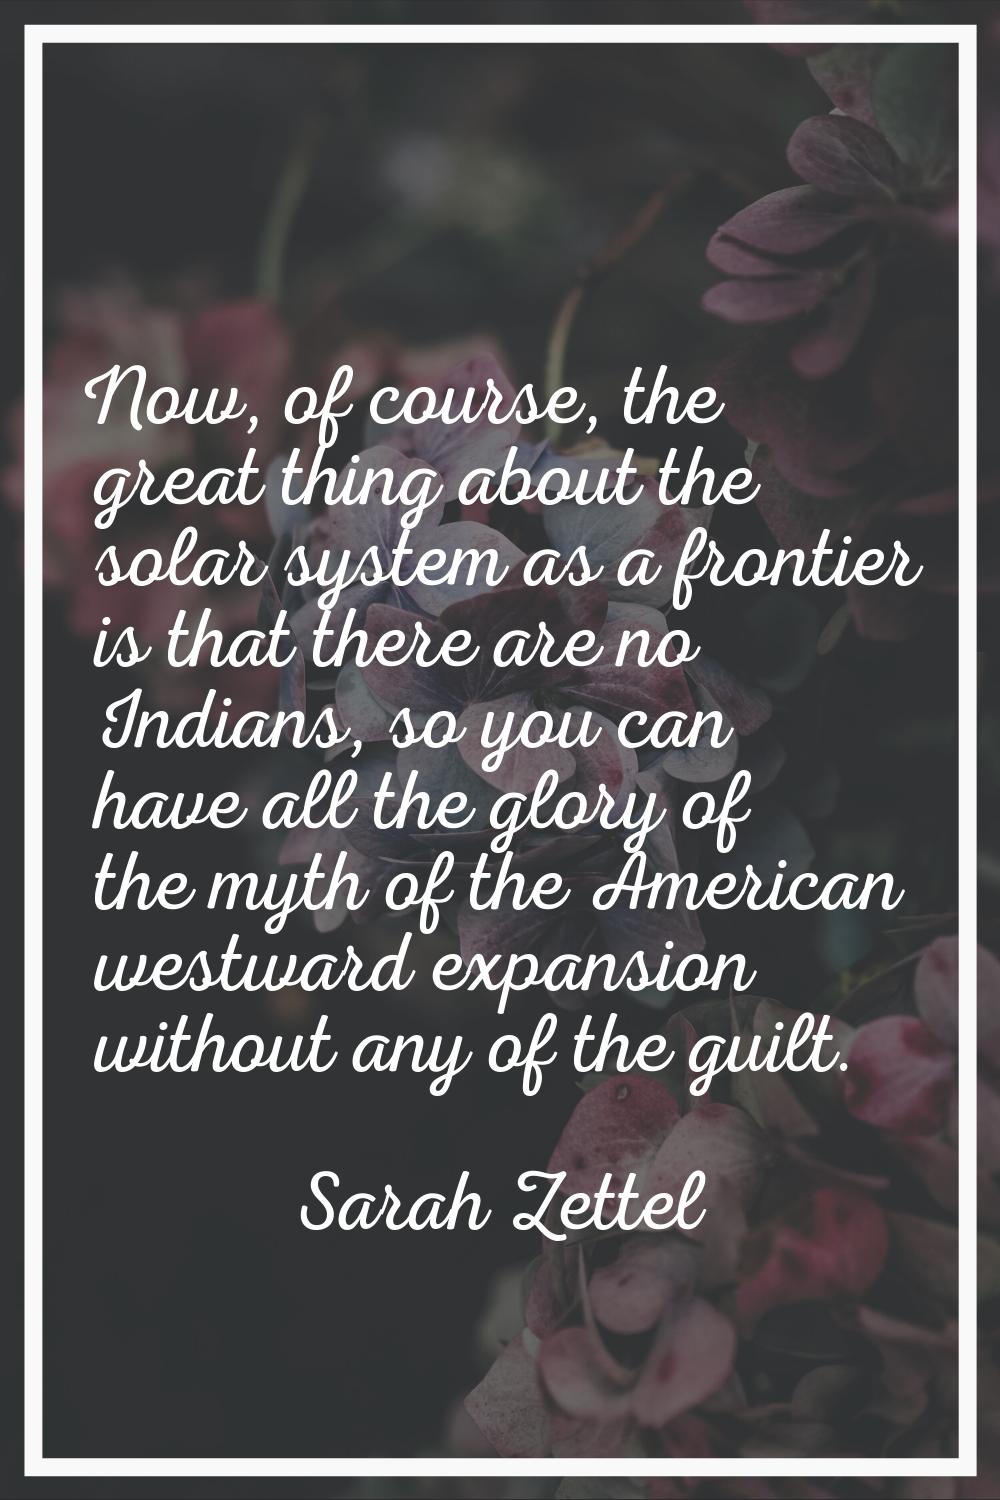 Now, of course, the great thing about the solar system as a frontier is that there are no Indians, 